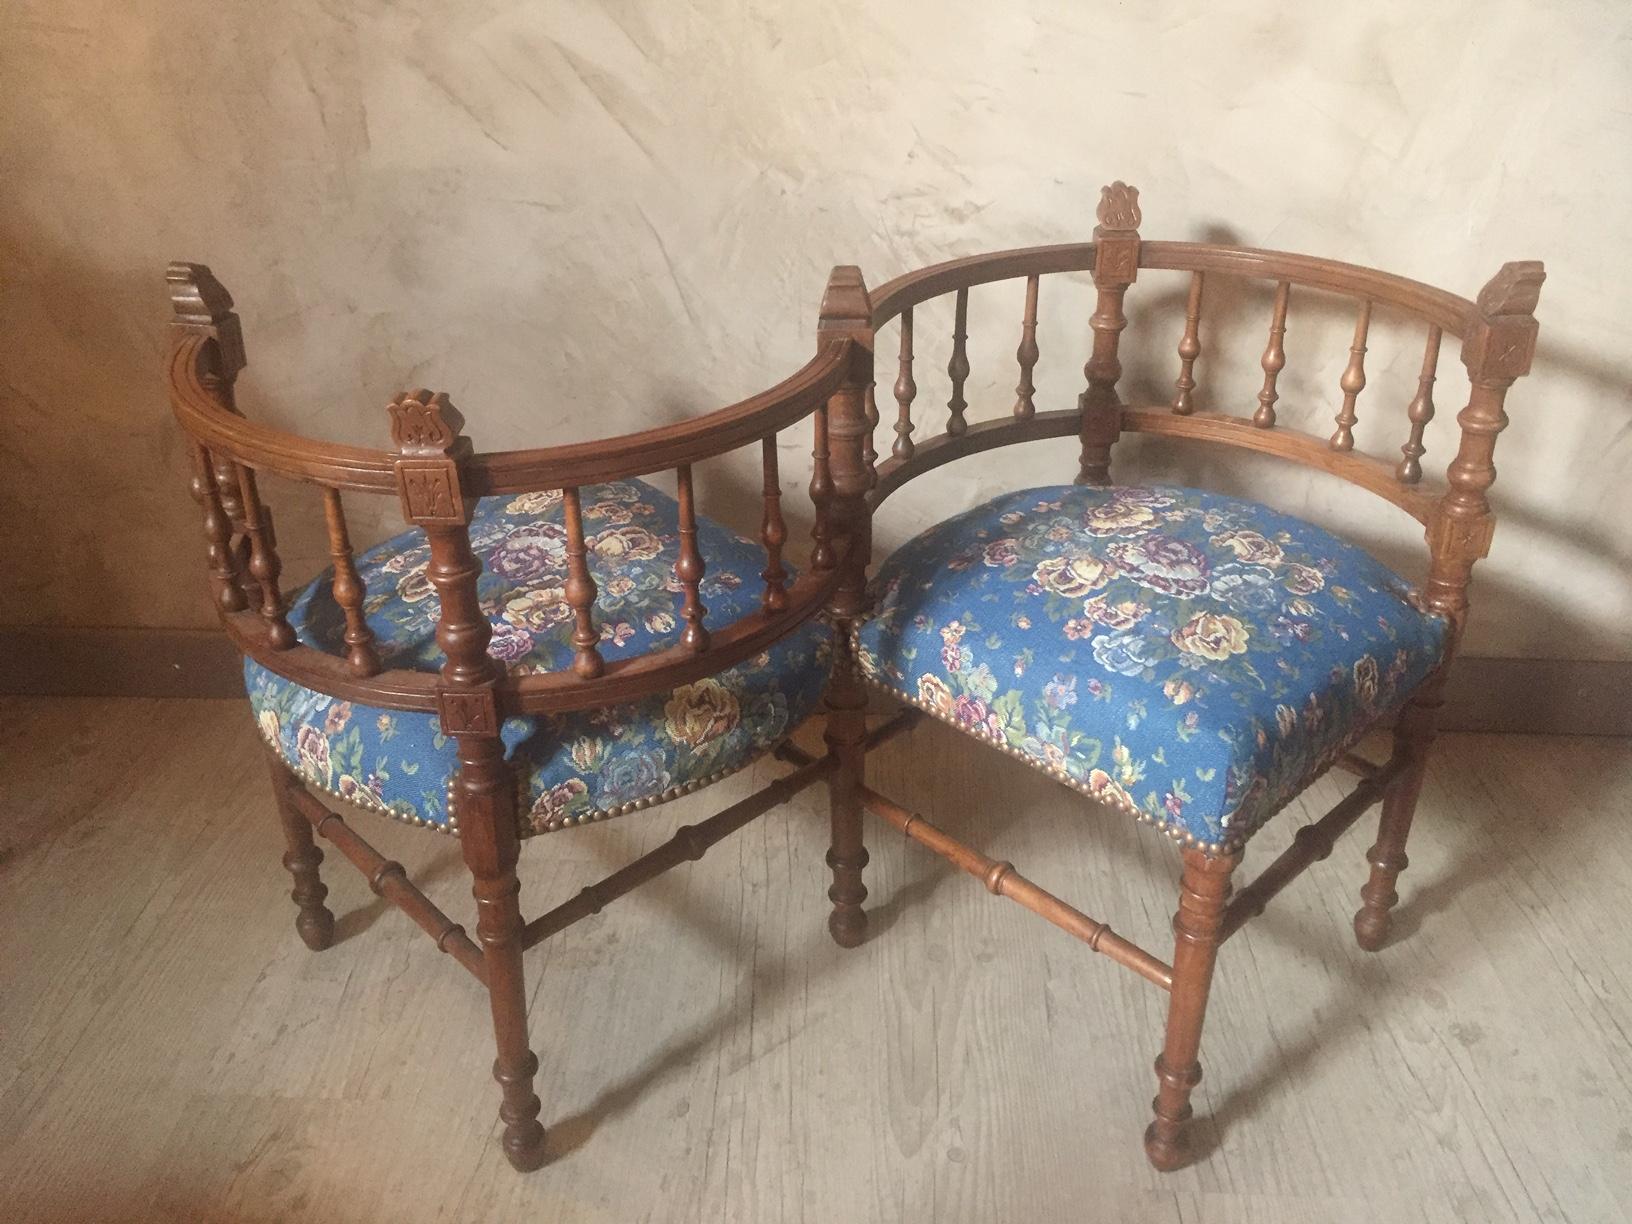 Beautiful and rare French walnut confident armchair from the 1900s.
This is in very good condition. The blue fabric is very nice.
This is rare to find a piece like this one. We found it in a beautiful house in Lyon (South east of France).